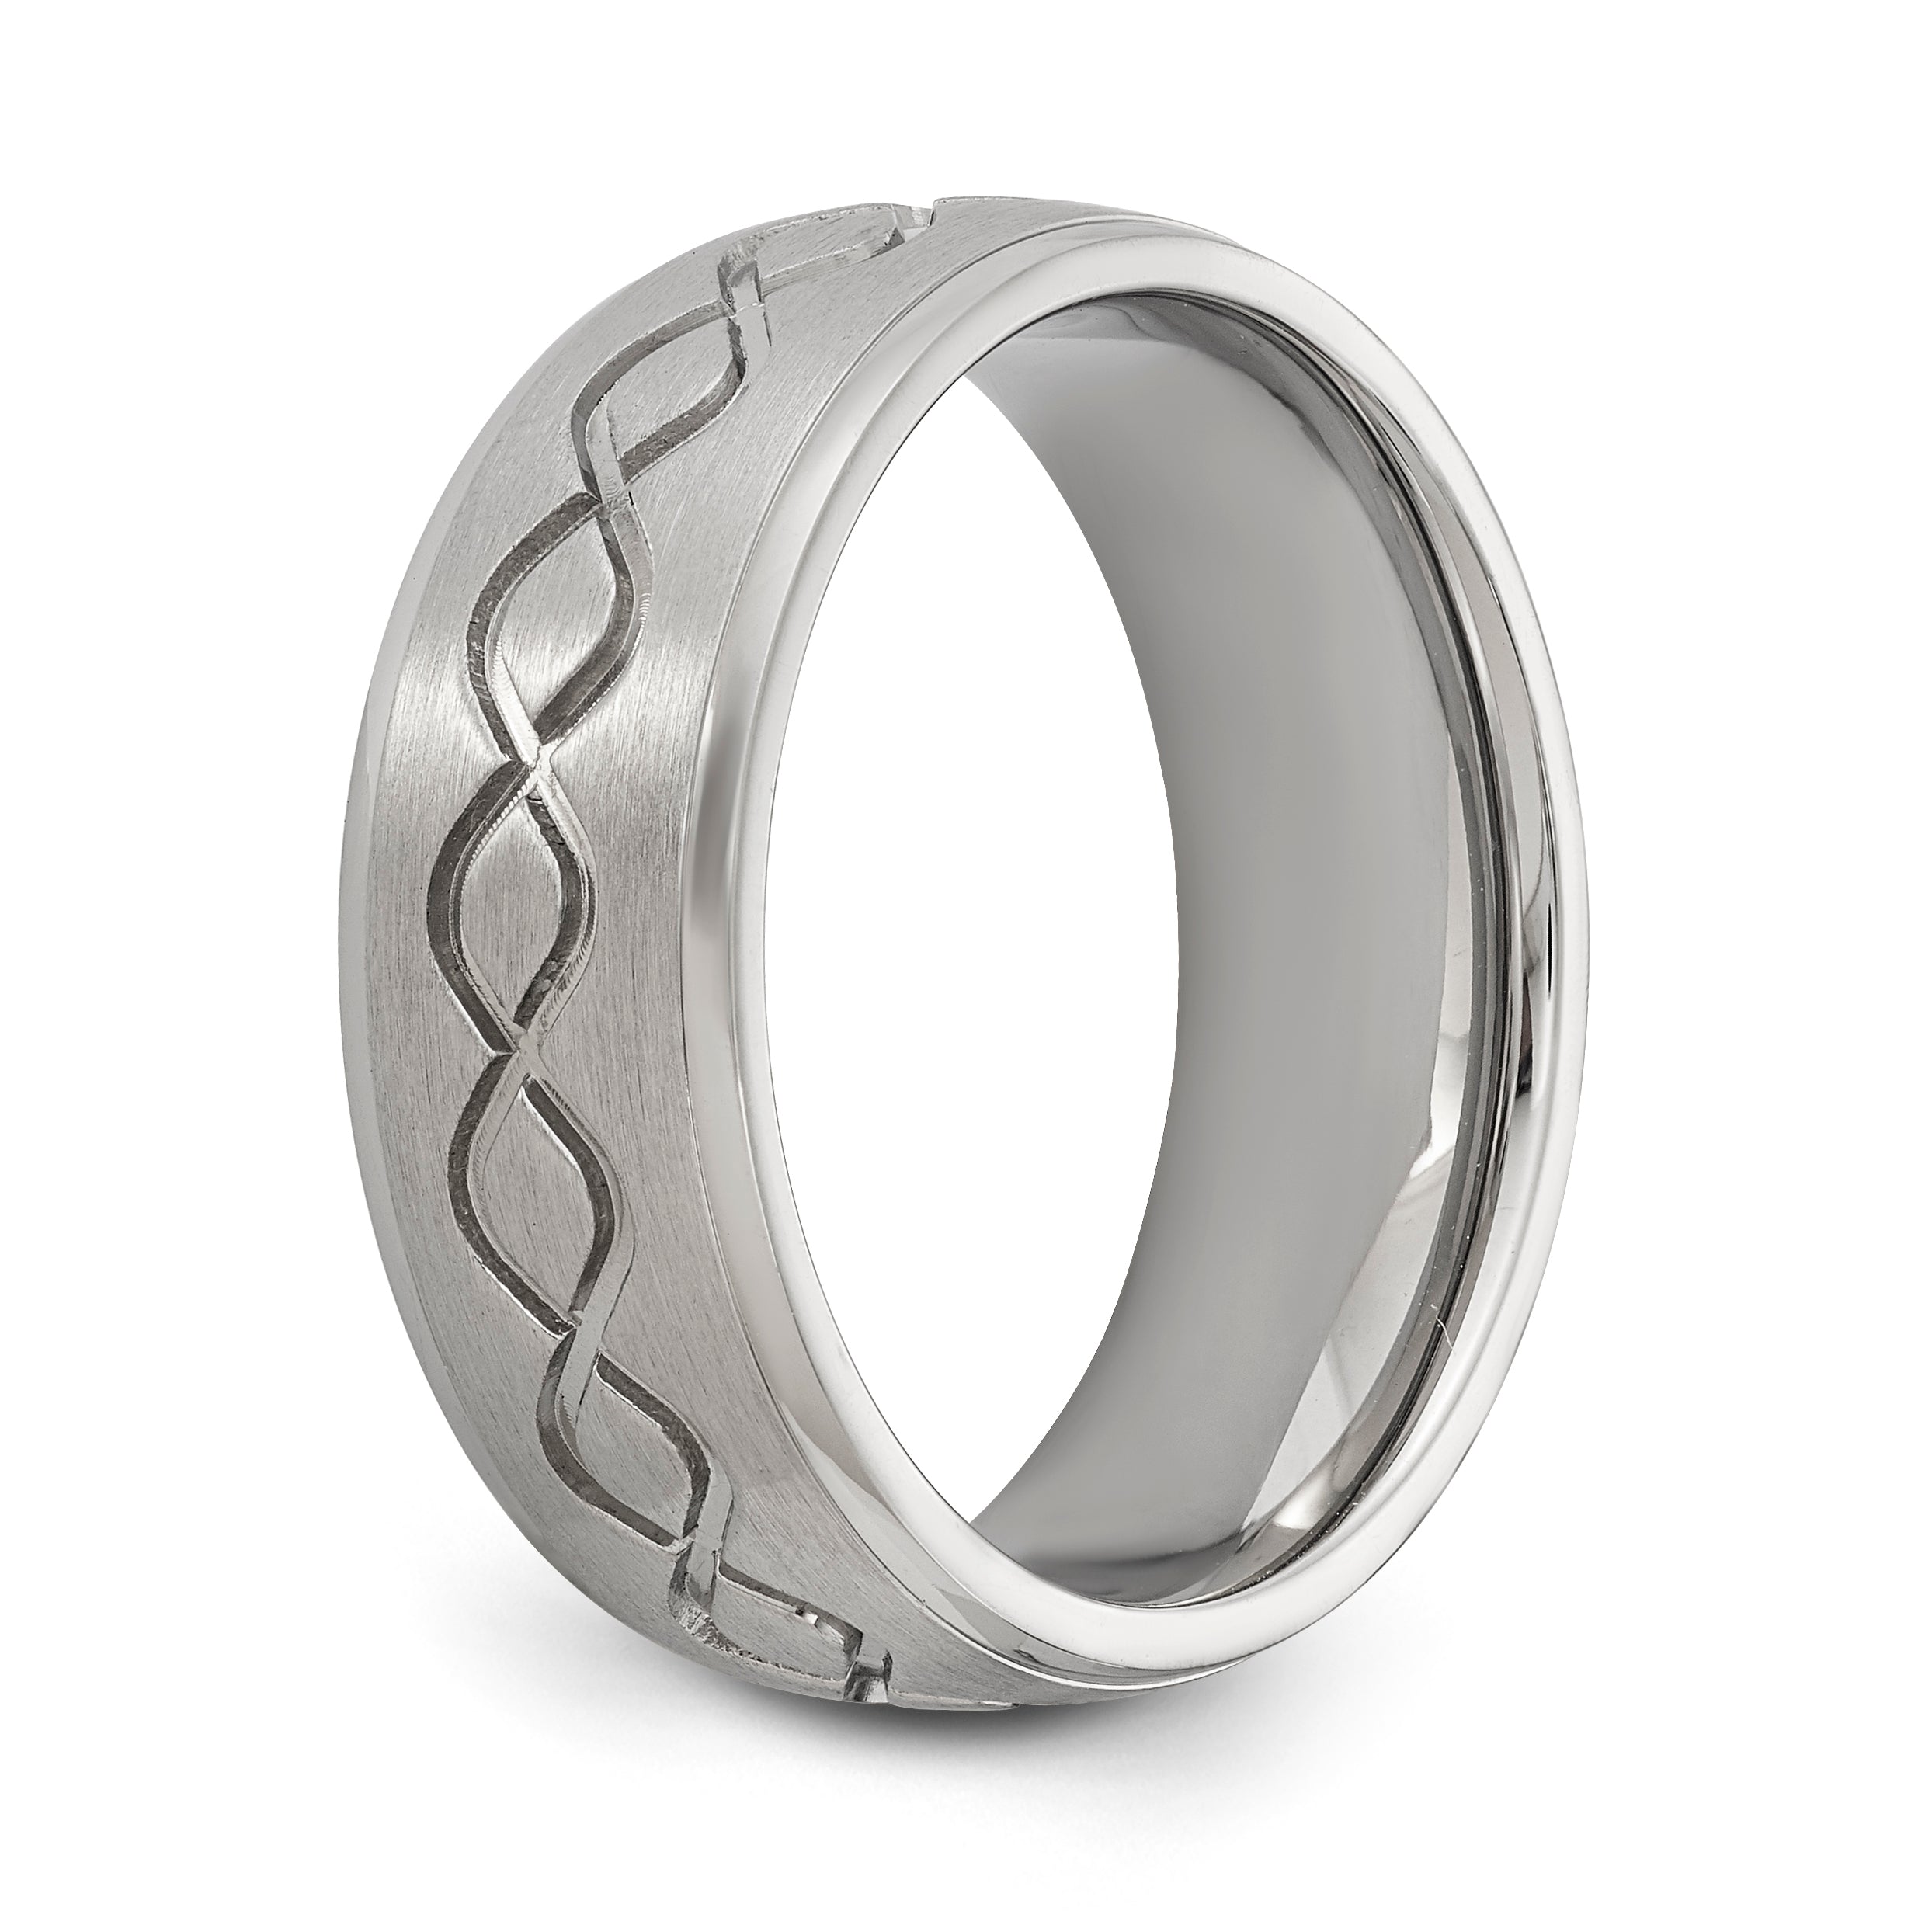 Stainless Steel Antiqued and Polished Fancy Design 8mm Ridged Edge Band